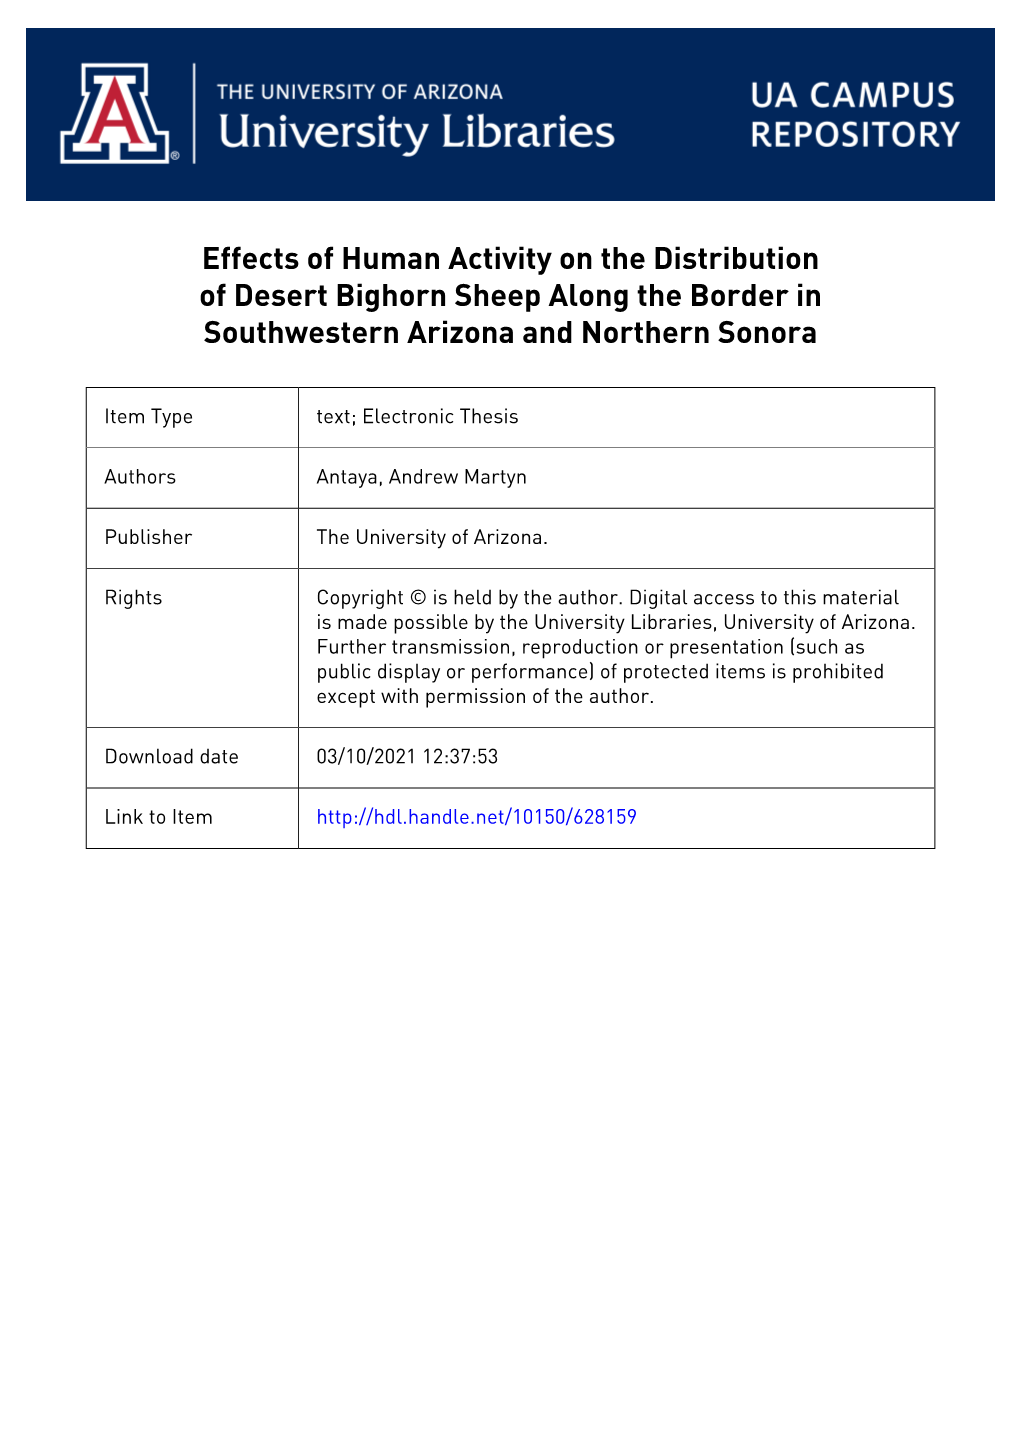 Effects of Human Activity on the Distribution of Desert Bighorn Sheep Along the Border in Southwestern Arizona and Northern Sonora